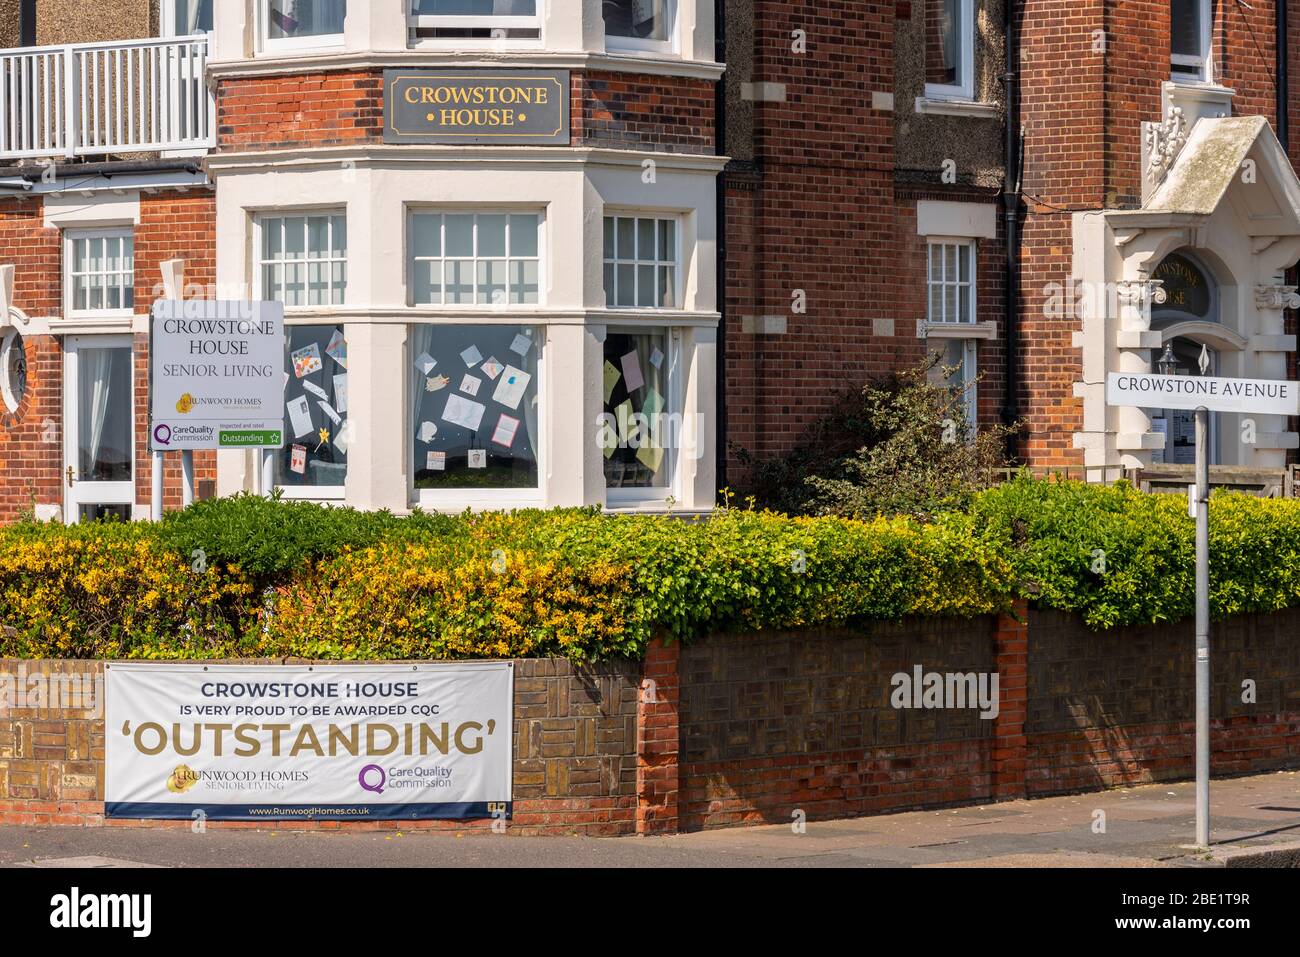 Crowstone House senior living old people's home on Southend on Sea seafront during COVID-19 Coronavirus pandemic lockdown period with artwork Stock Photo